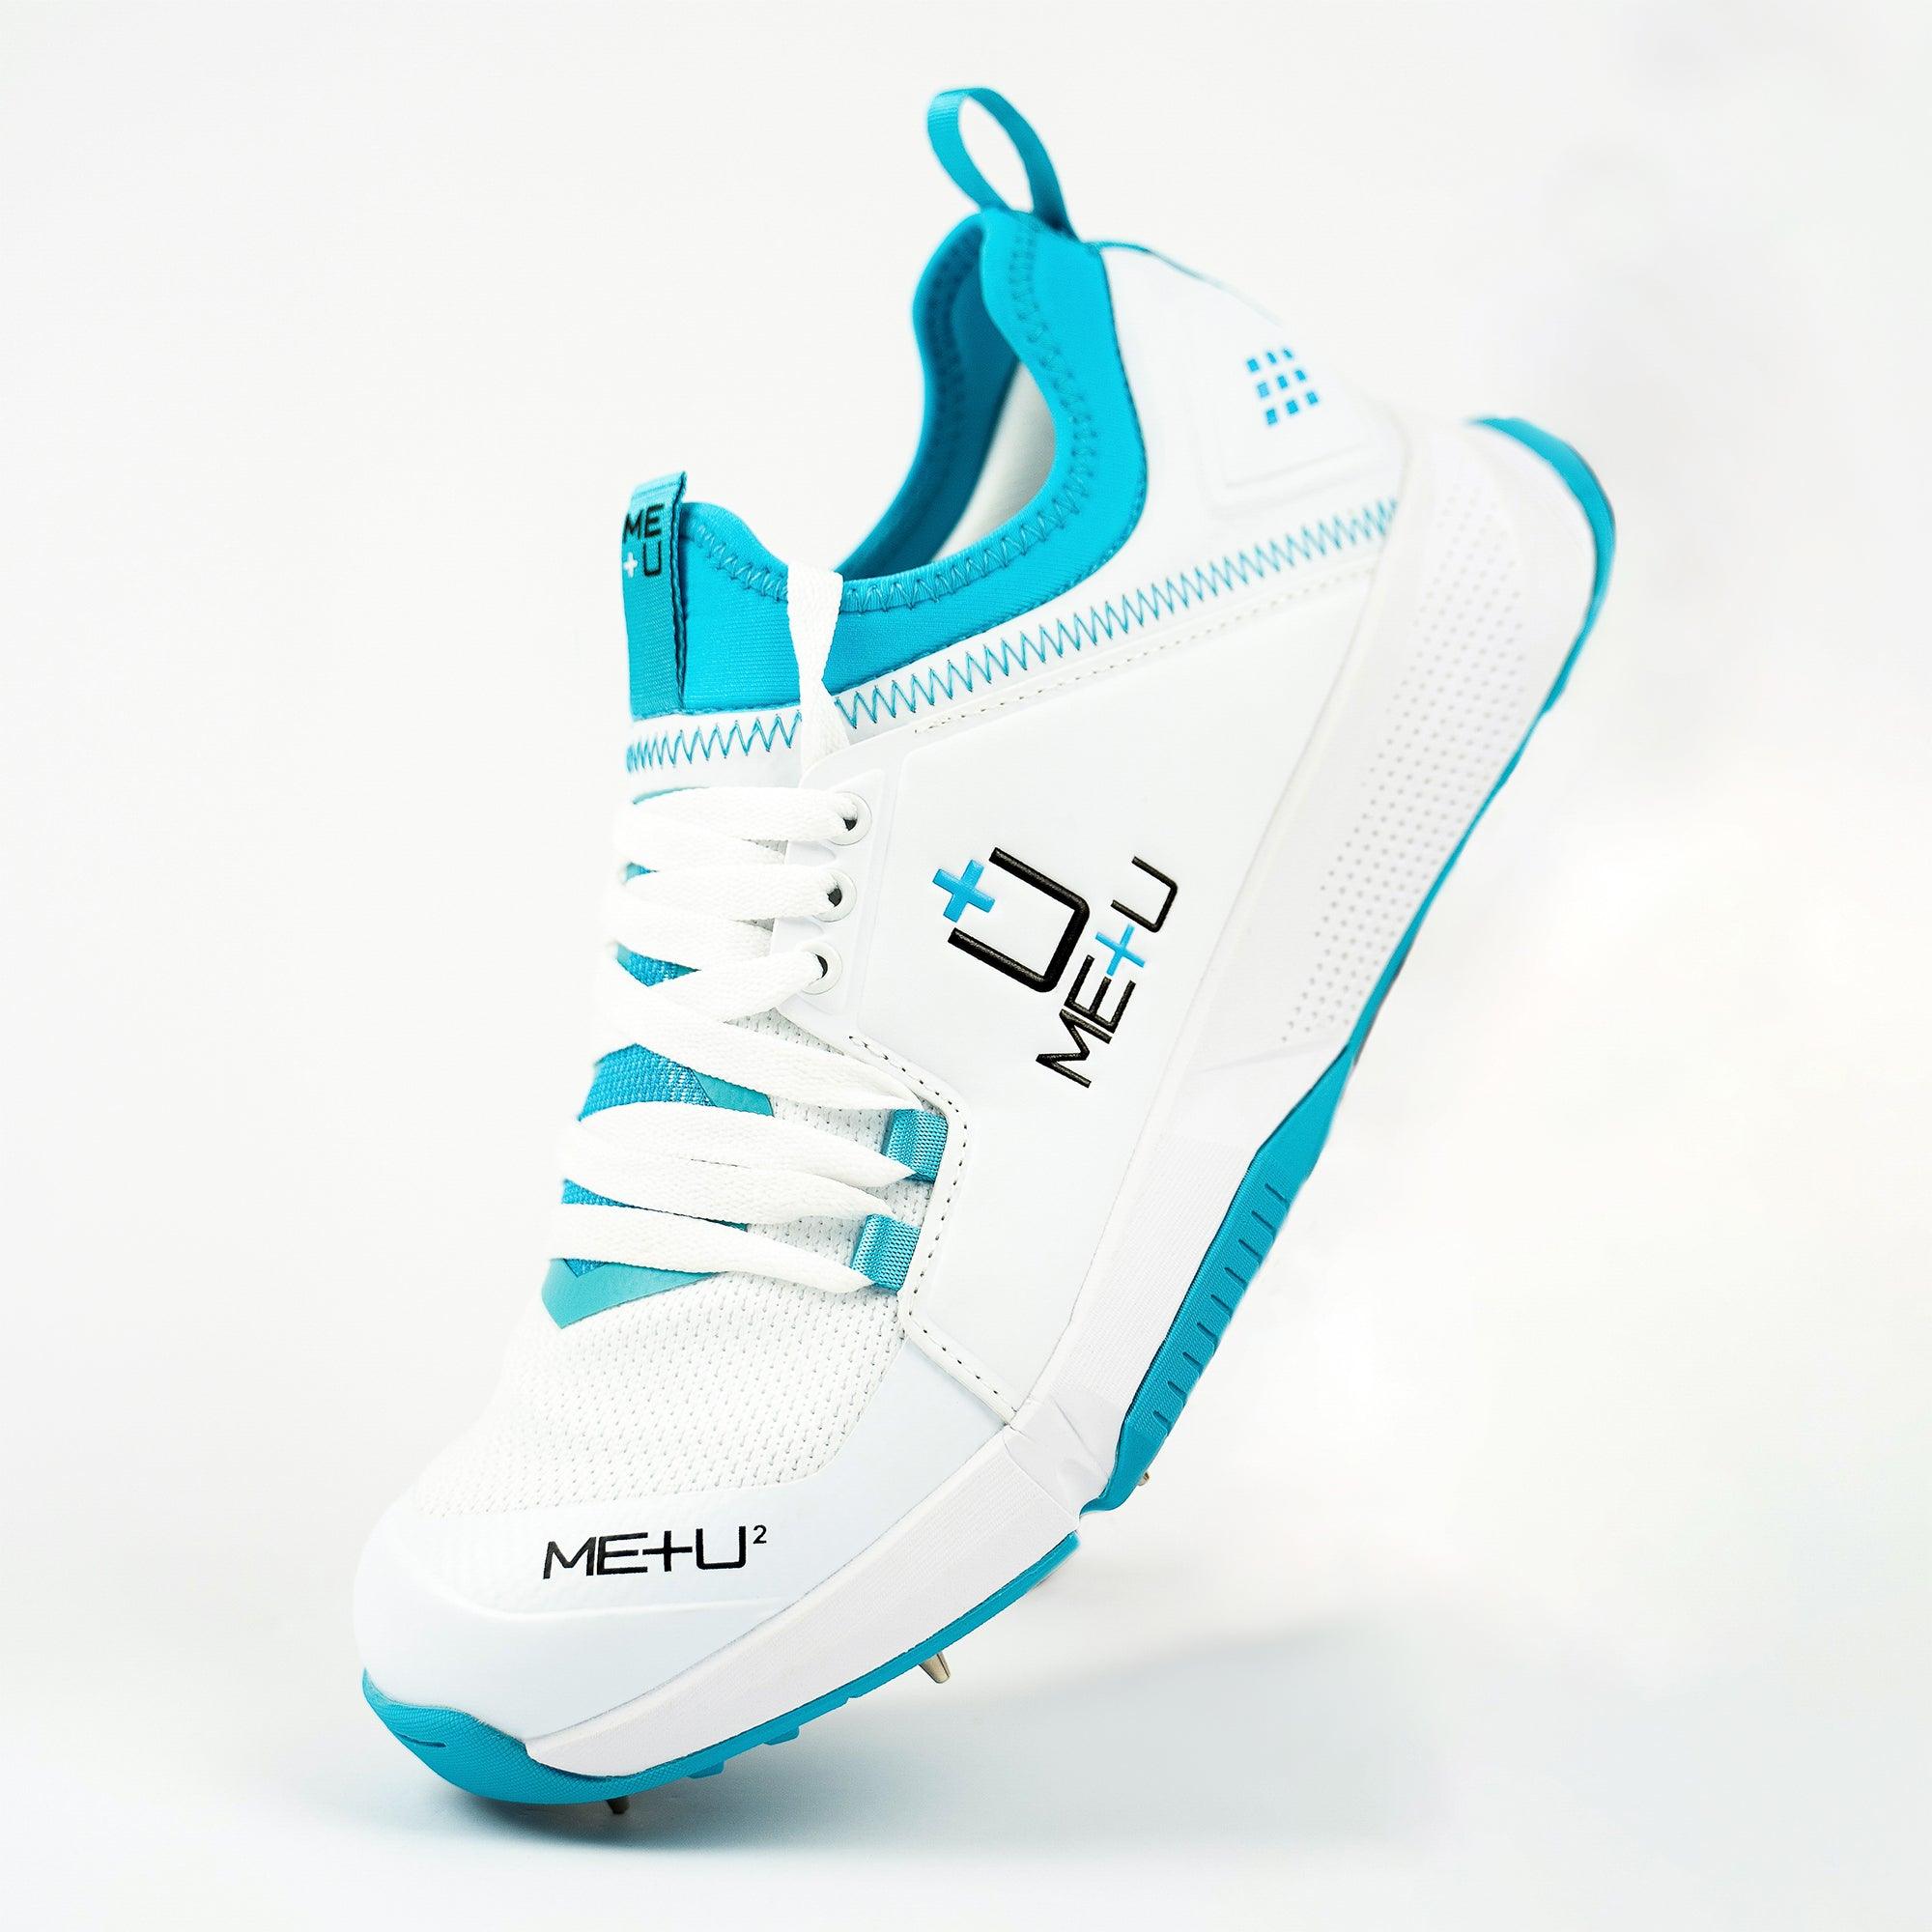 ME+U Mens All Rounder Cricket Shoes side profile - heel raised - with Blue Colours on white background